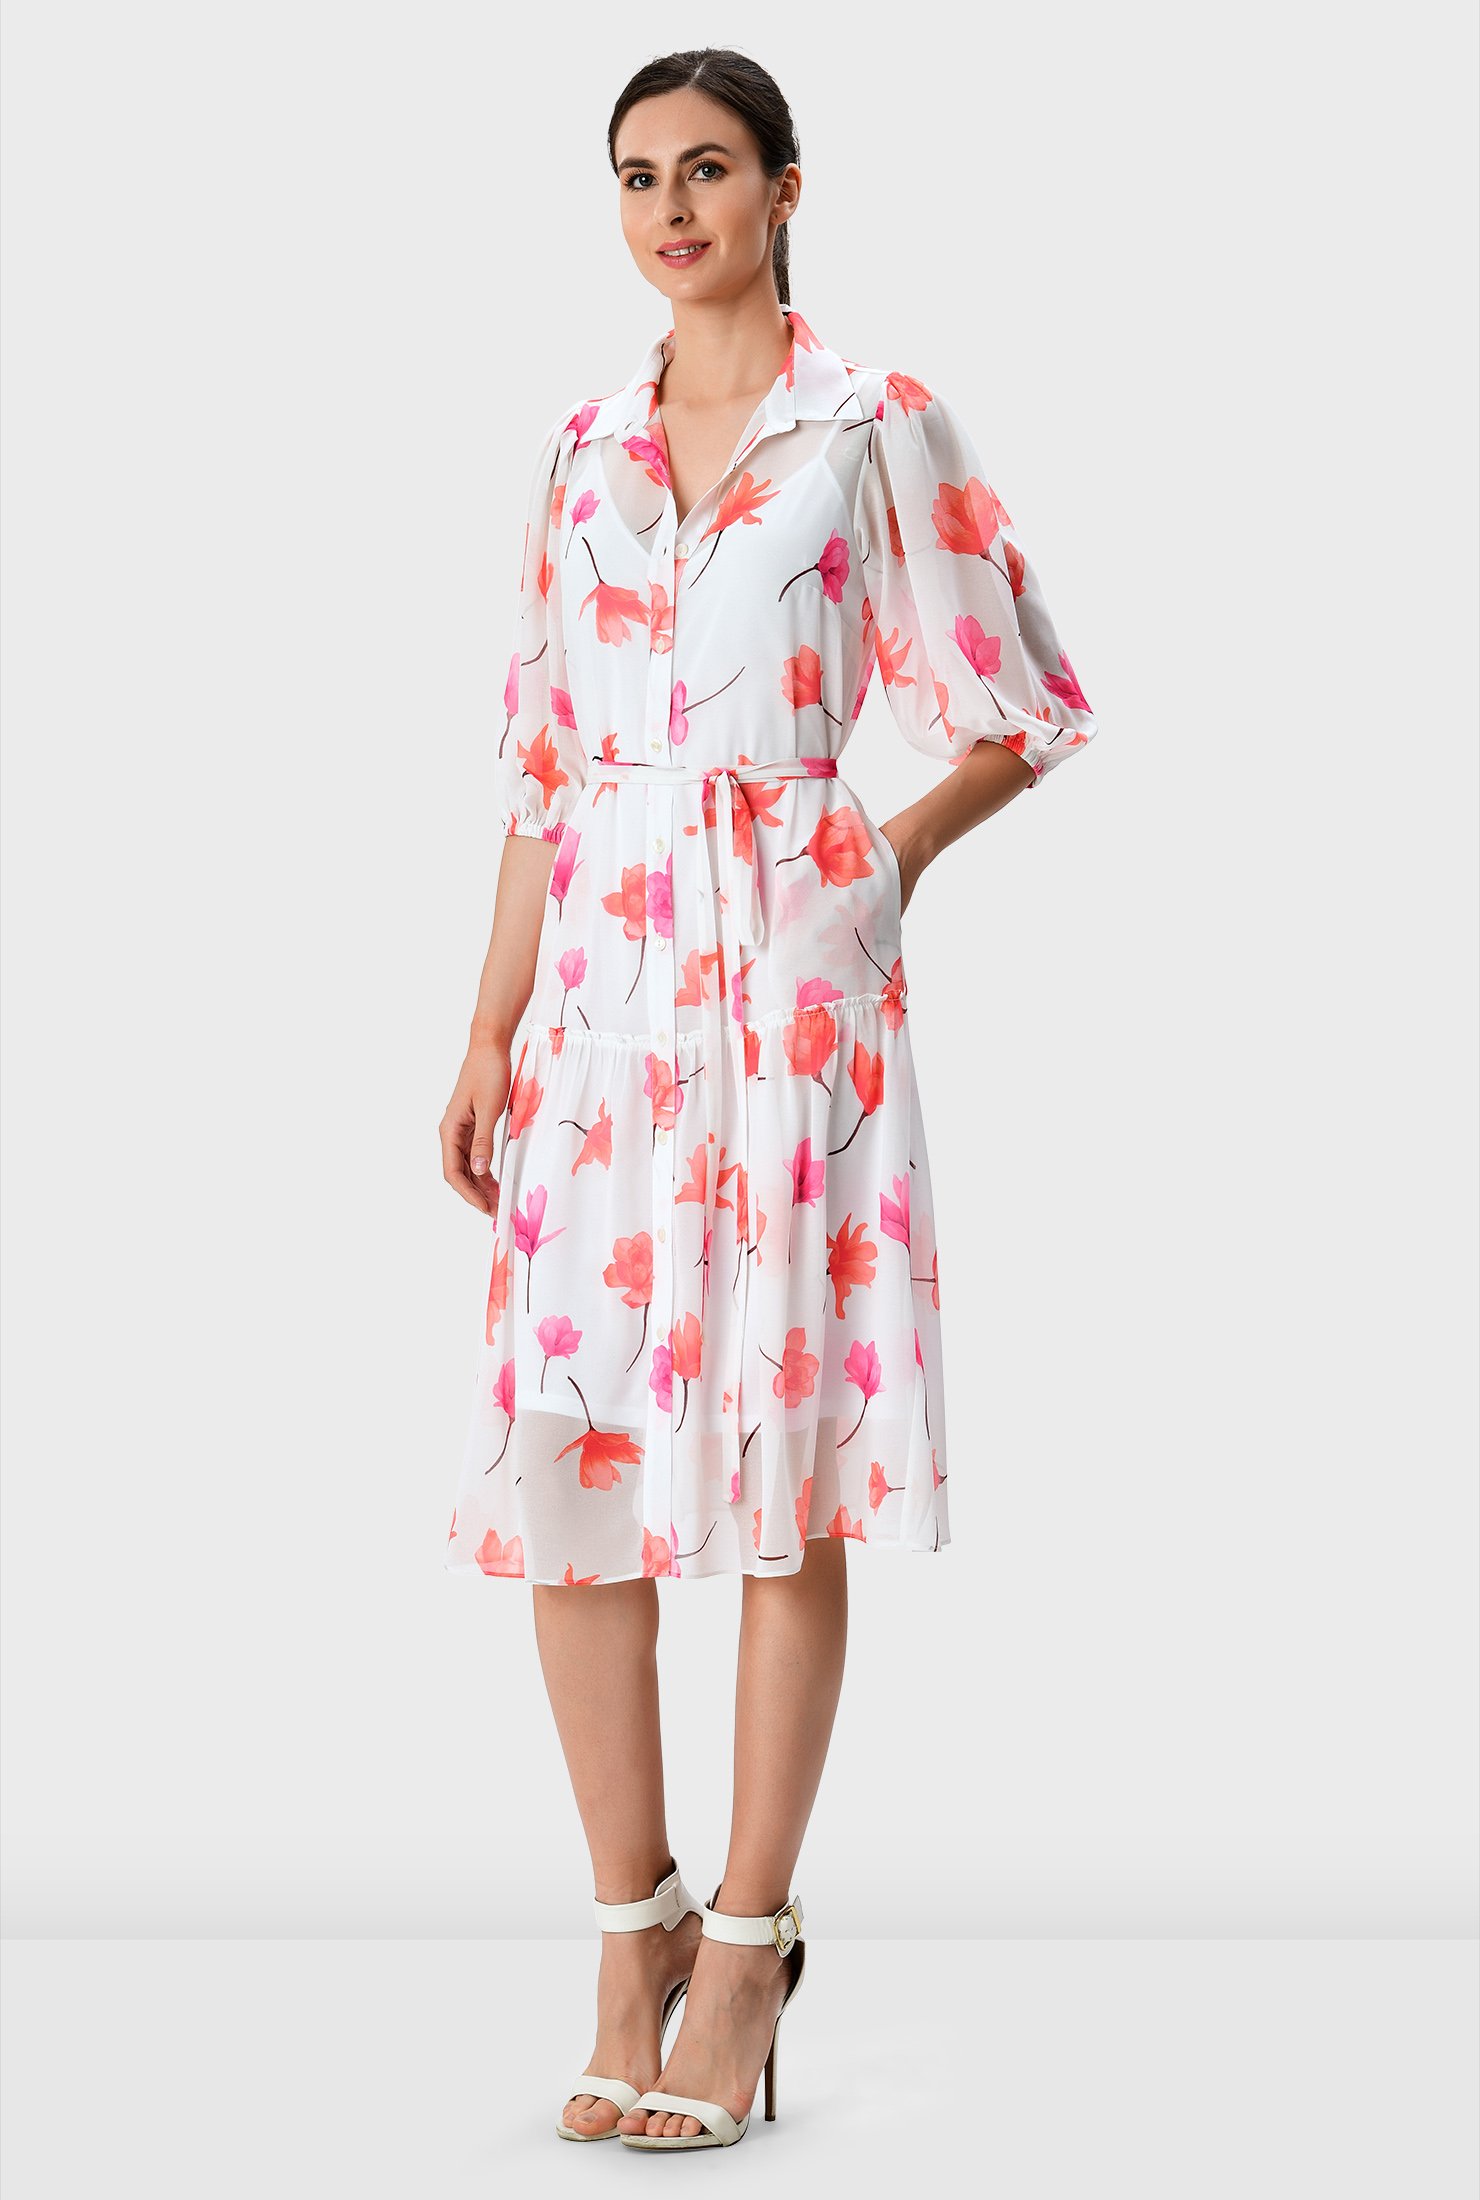 A visual delight, our sheer floral print georgette shirtdress features a drop waist with ruffle frill trim and a breezy flared hem that makes it so much fun to put on.